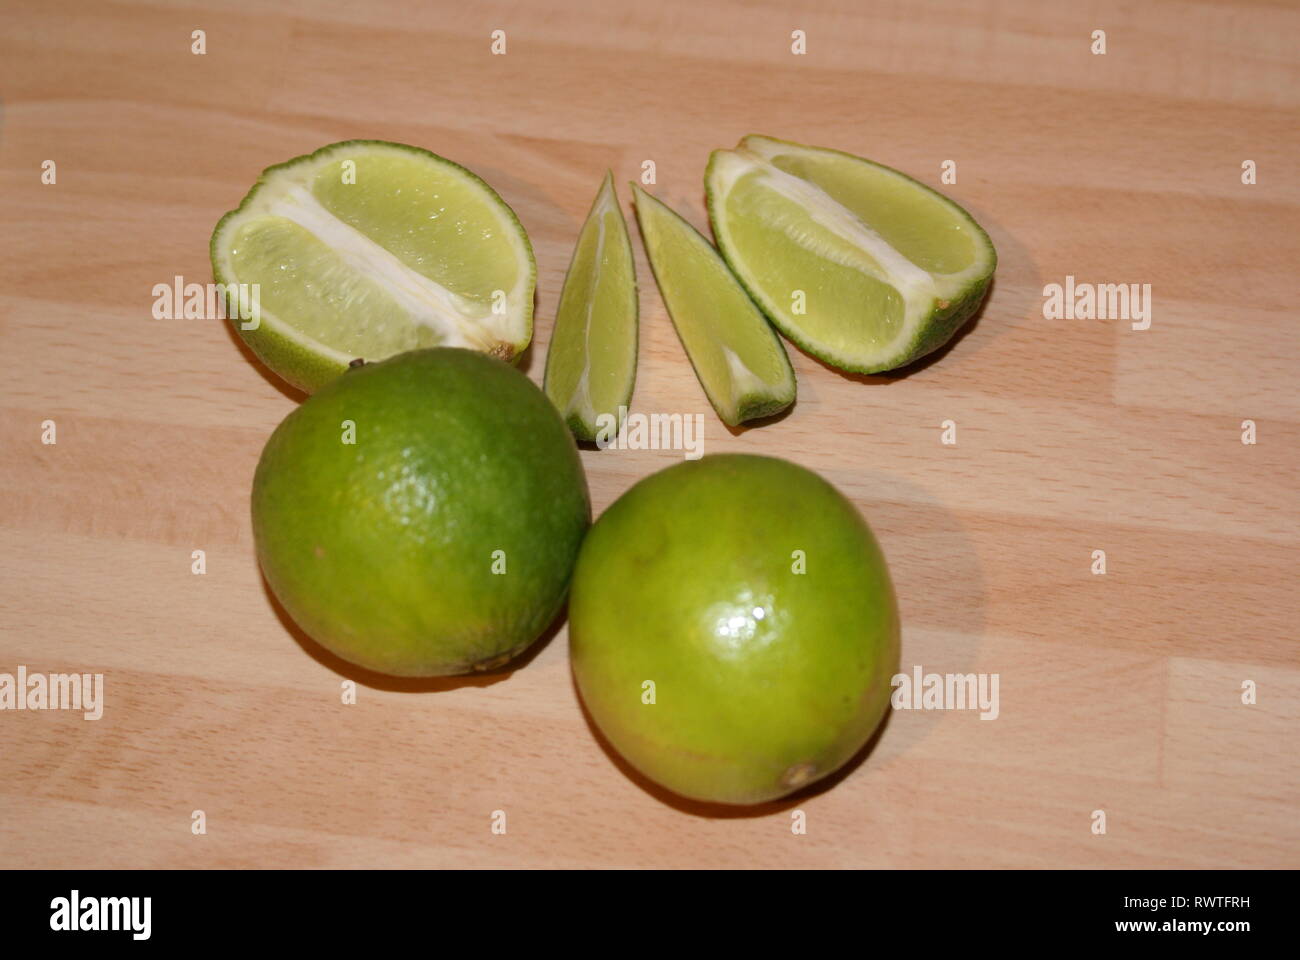 Lime Obst Stockfoto